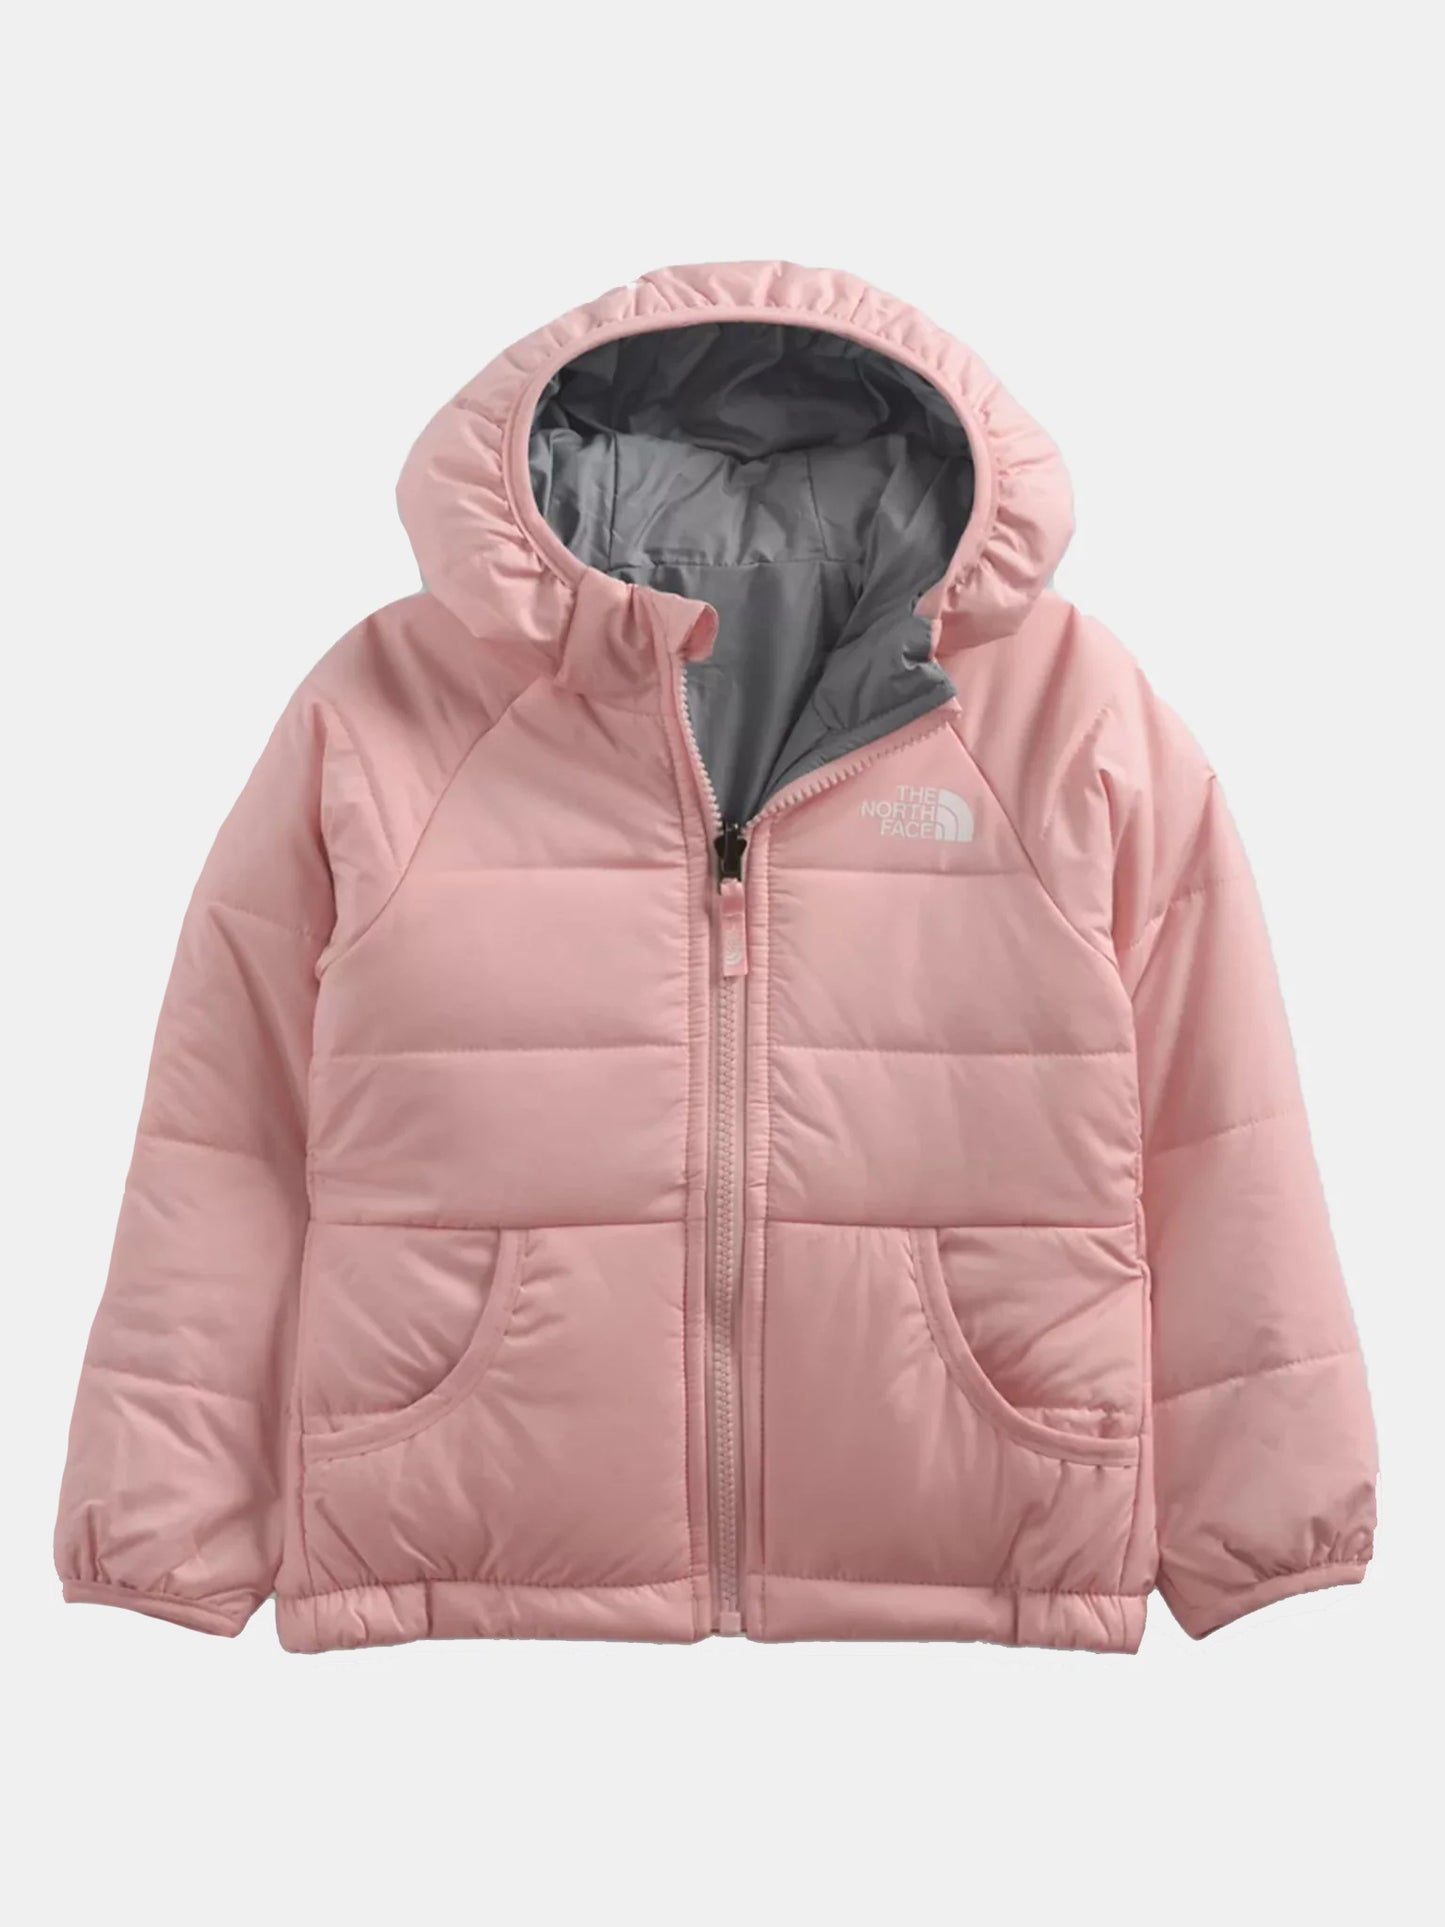 The North Face Little Kids' Reversible Perrito Jacket